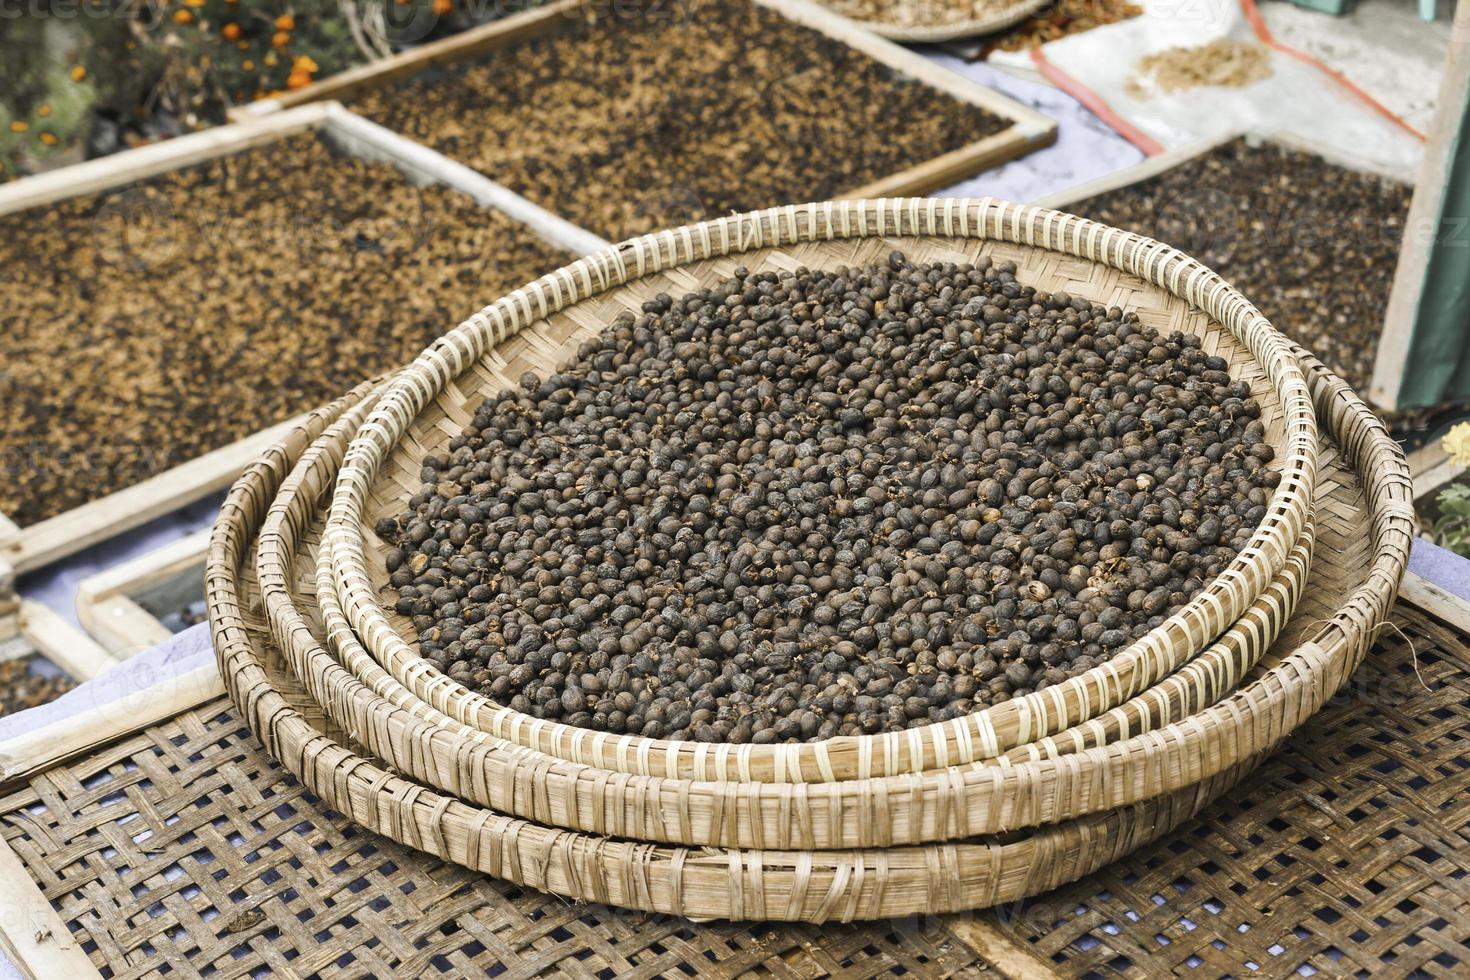 Coffee beans drying in the sun in the traditional basket at Indonesia photo